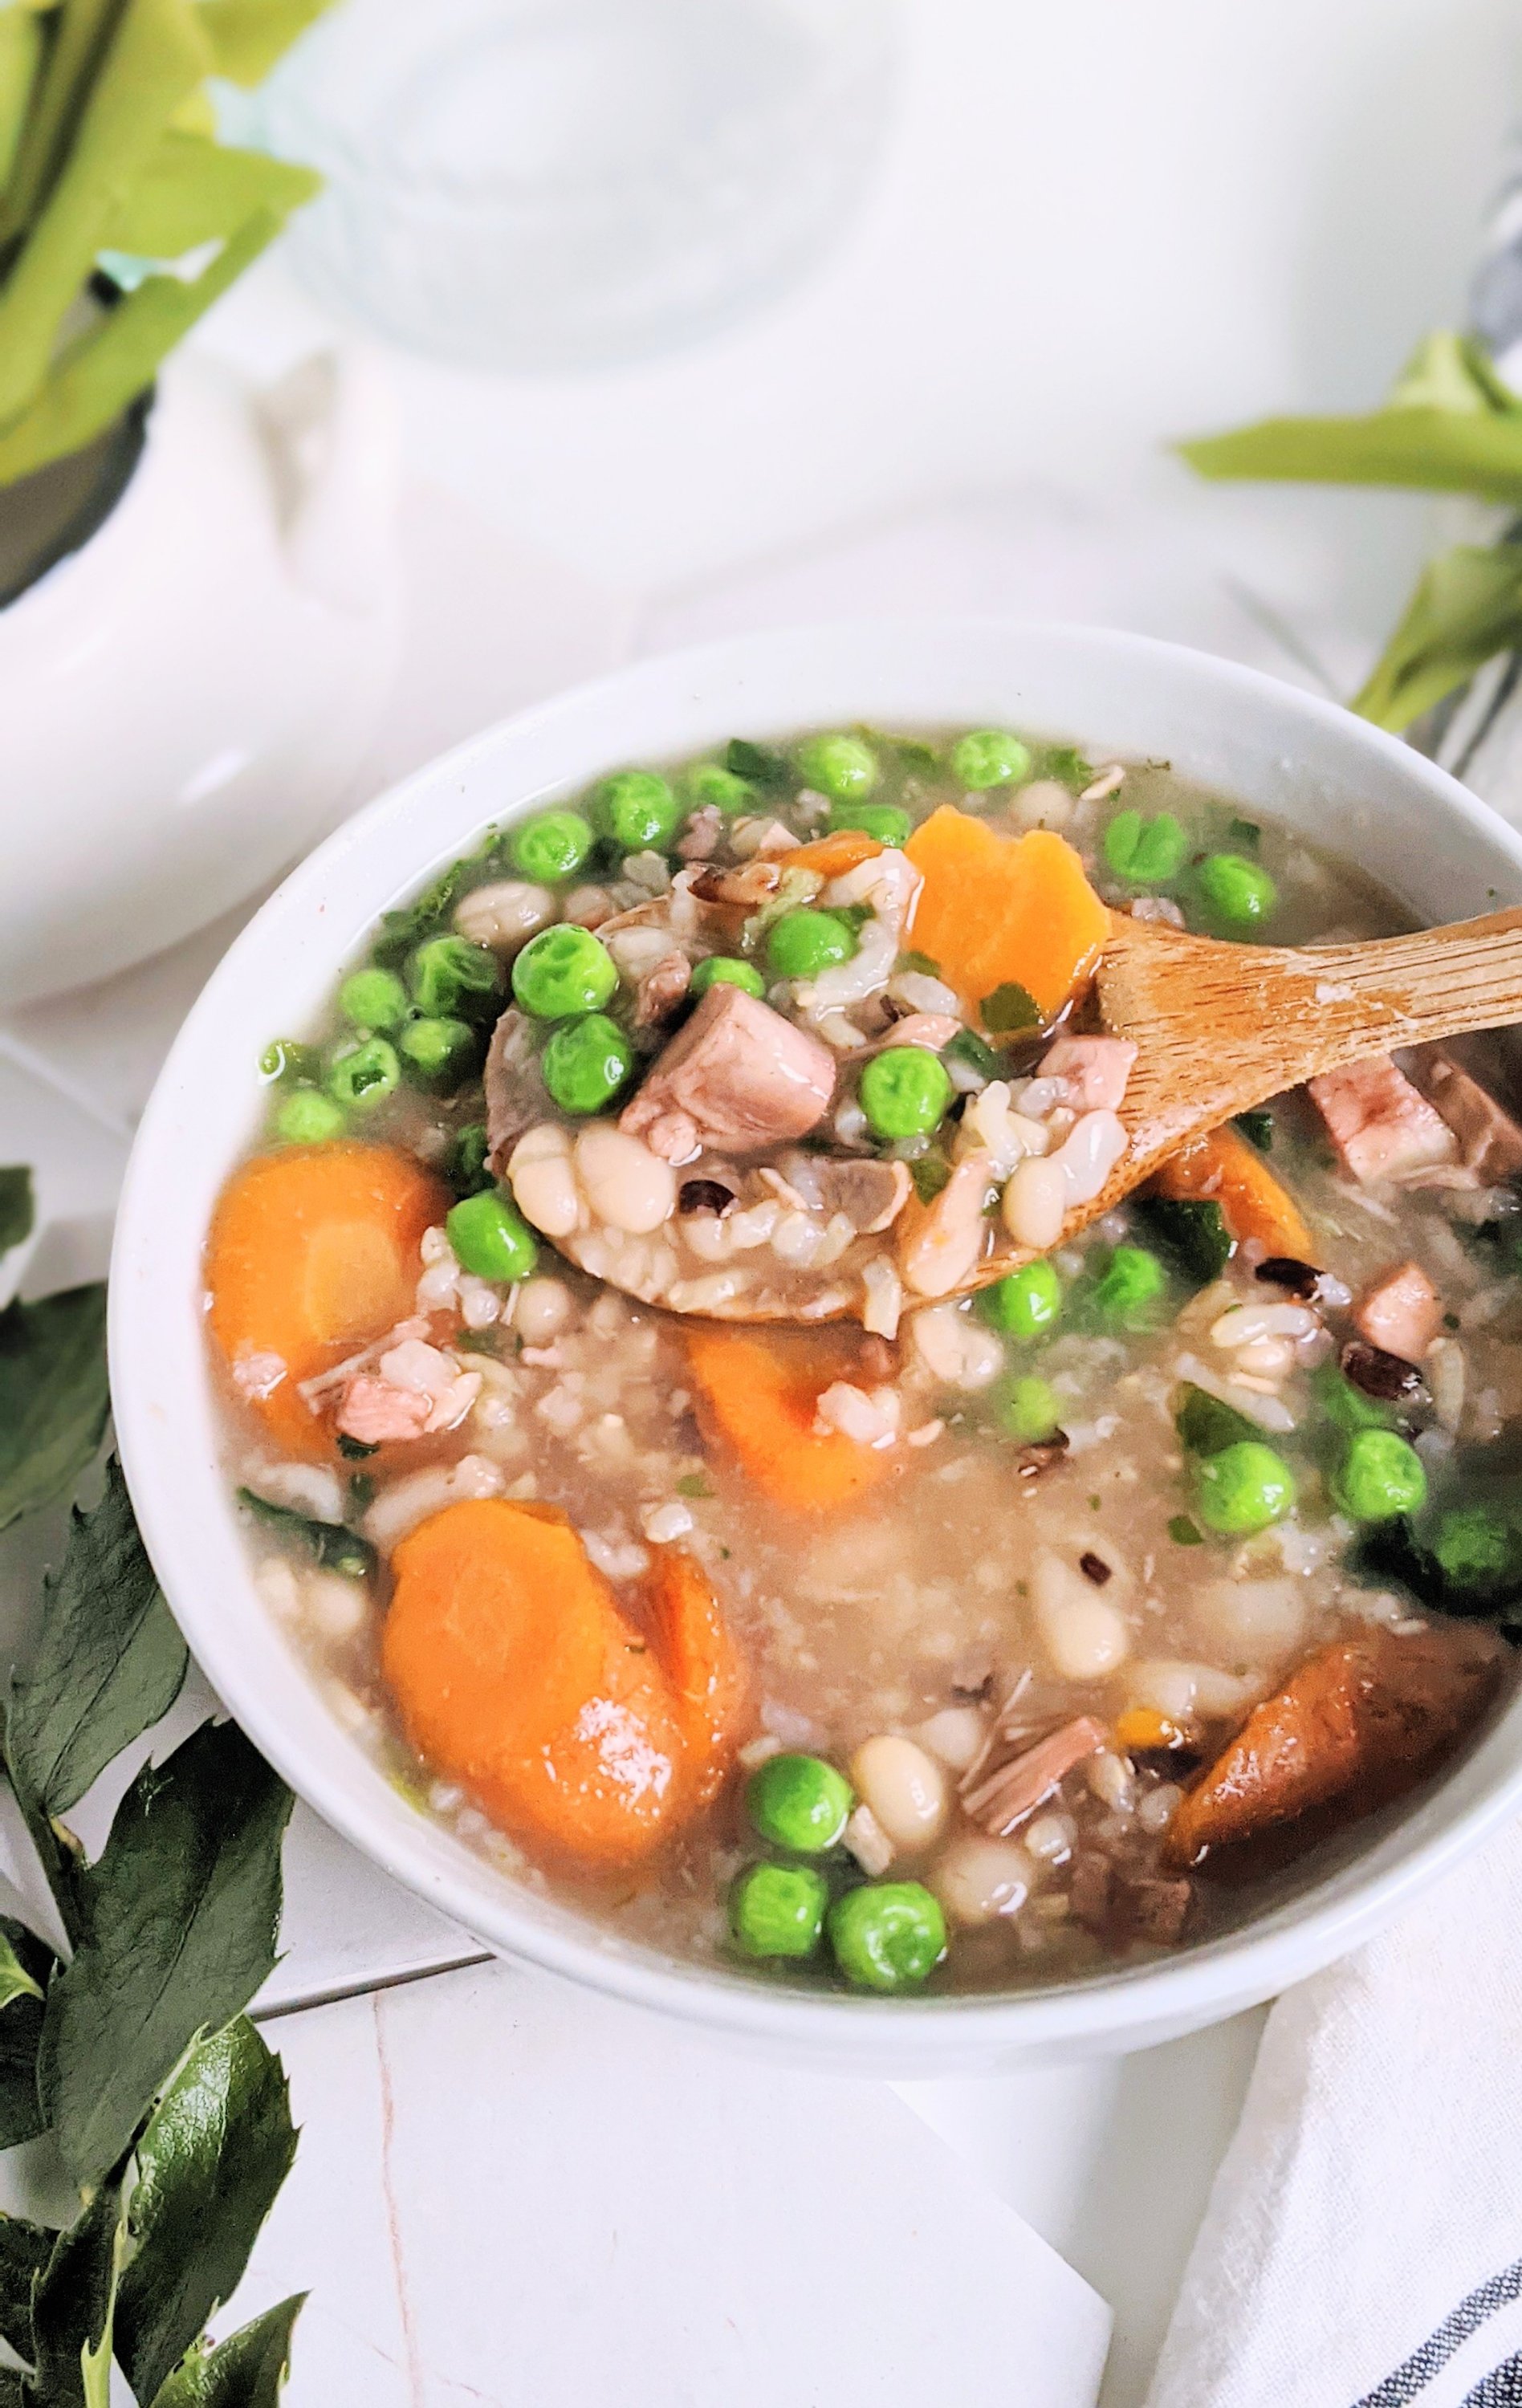 turkey bean soup recipe gluten free dairu free leftover turkey recipes no dairy thanksgiving leftovers what to do with cooked turkey meat